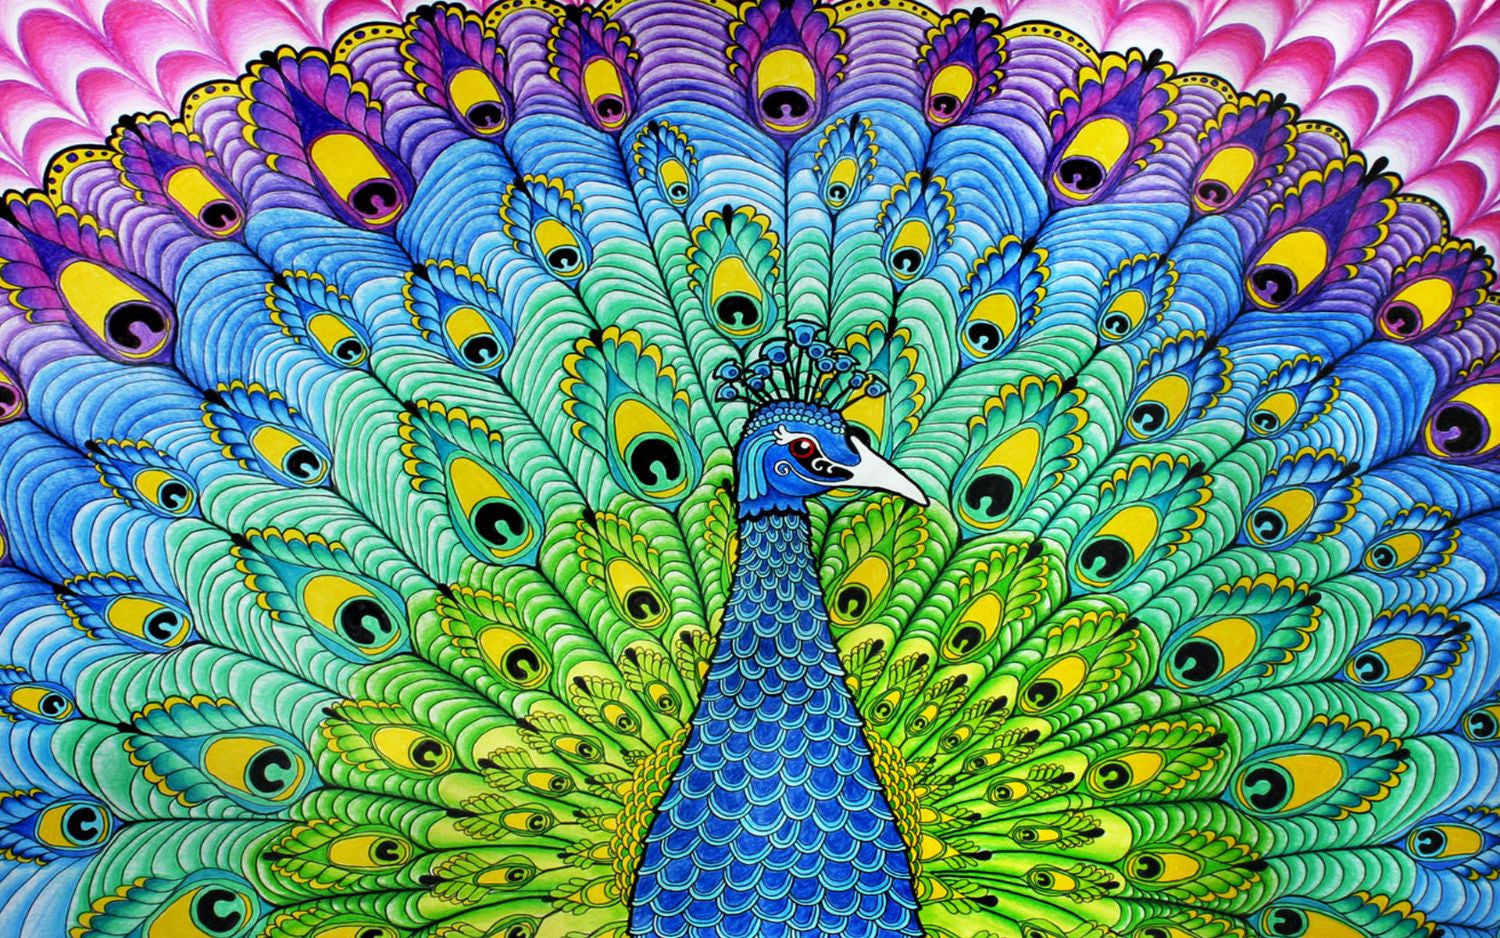 Colorful Peacock Art - Posters by Hamid Raza | Buy Posters, Frames ...